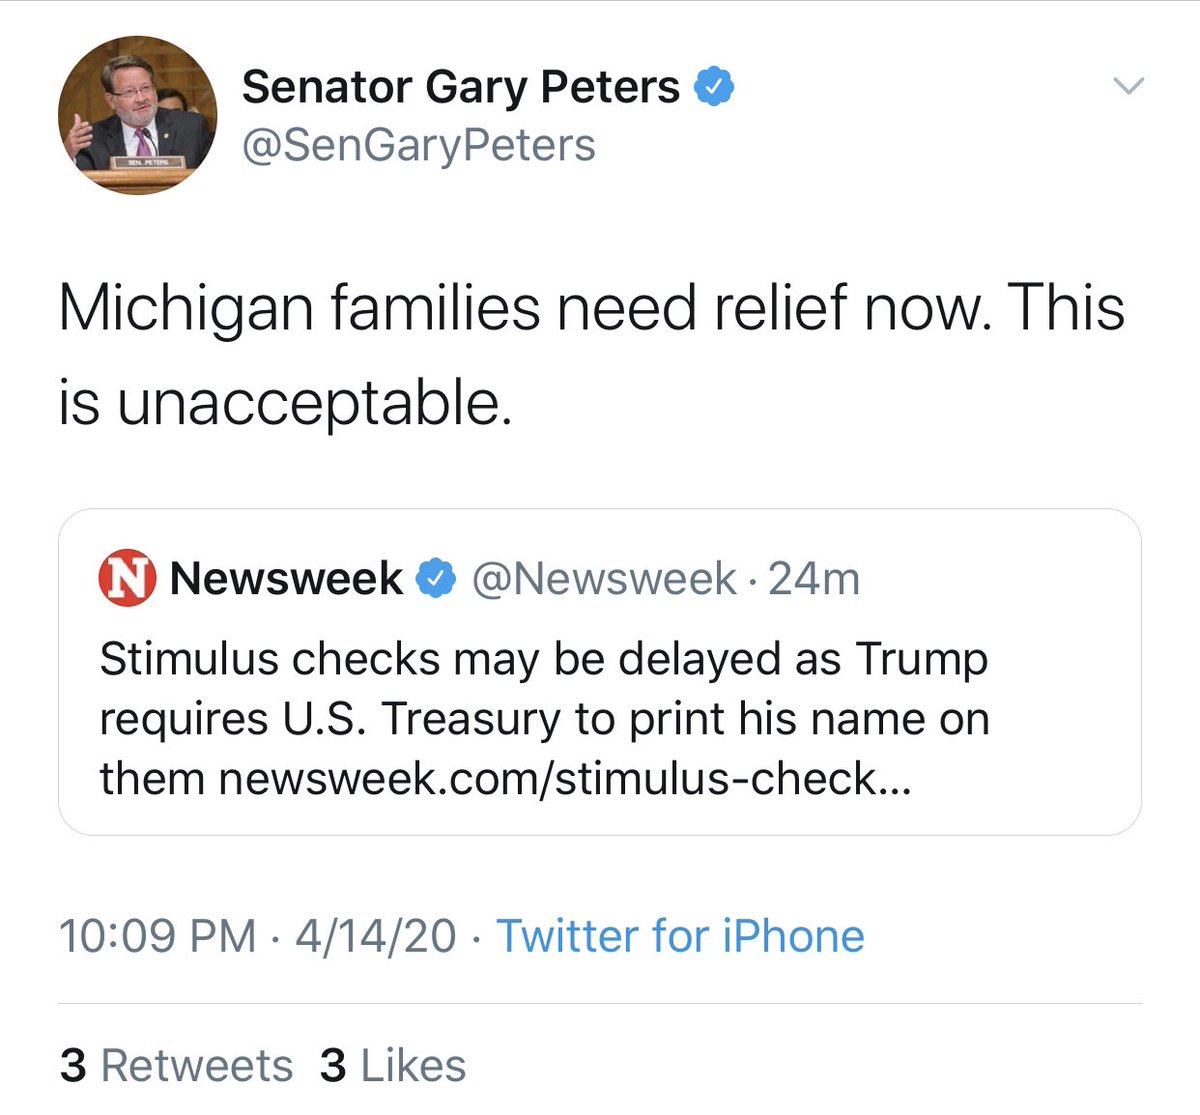 Now you have US Senators promoting a story based on the original fake news pushed by Washington Post reporters. It’s like an outrageous game of gaslighting telephone. And of course  @SenGaryPeters didn’t read her article.